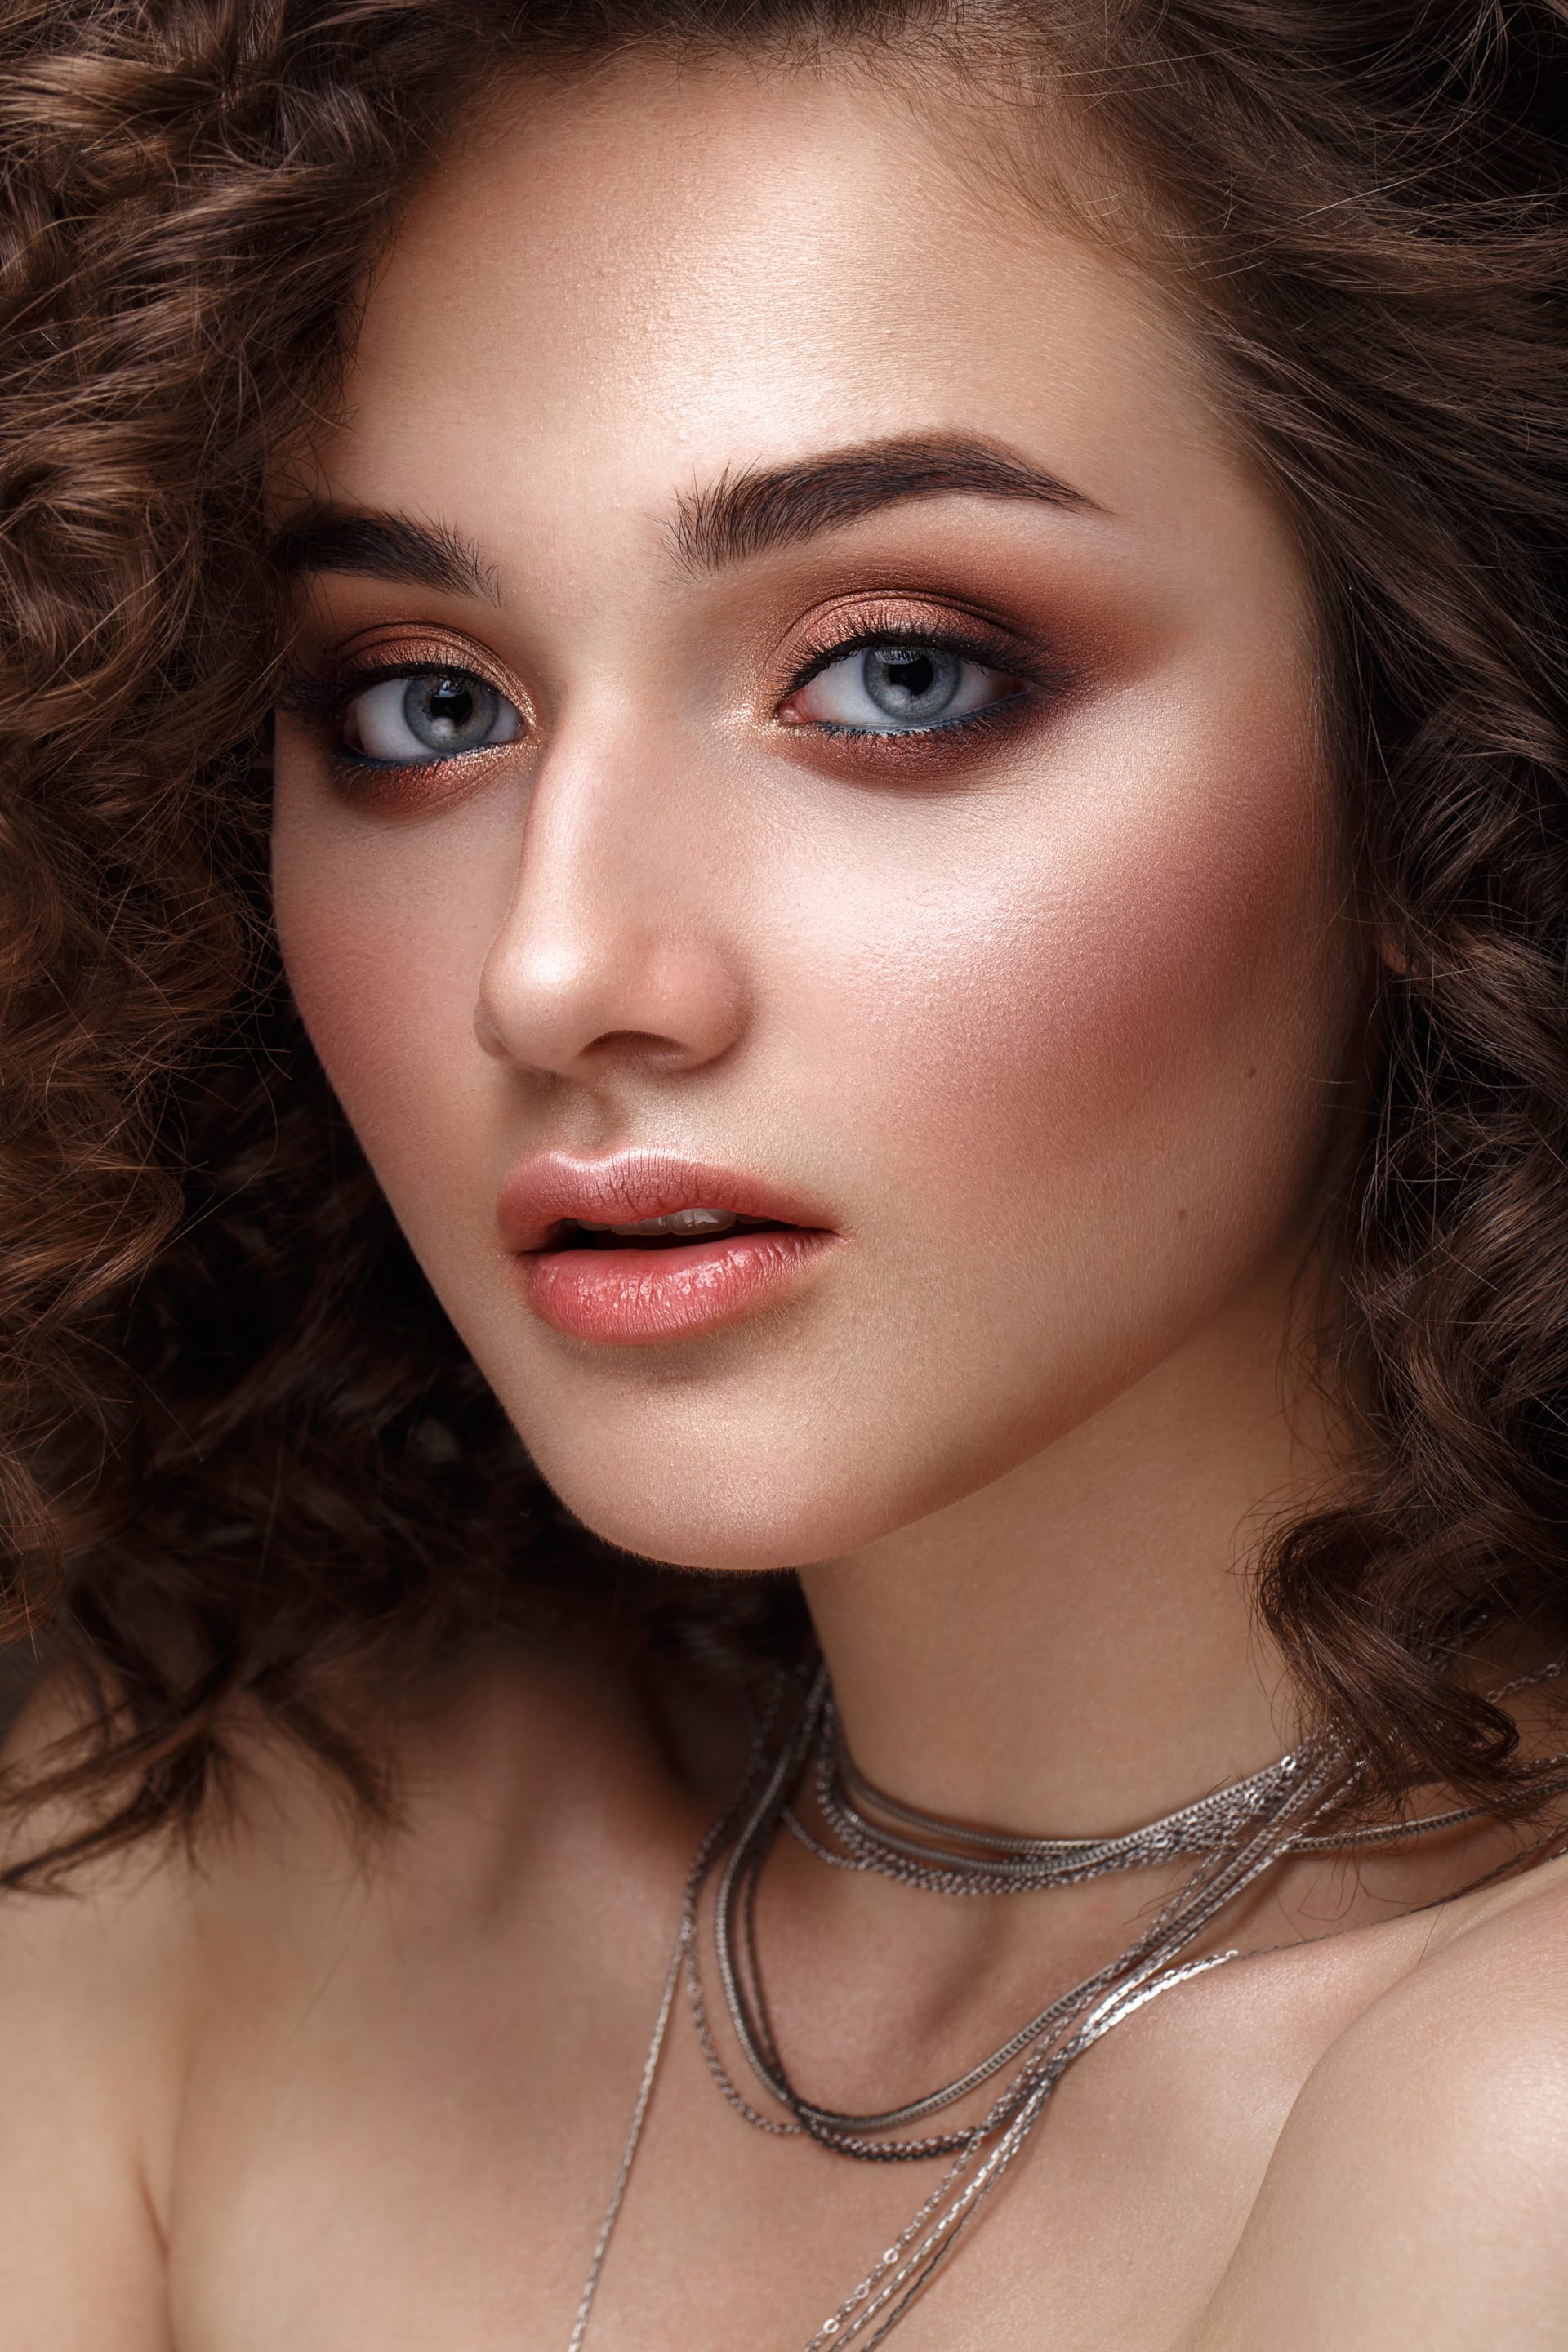 Girl with perfectly curly hair classic makeup beauty face image